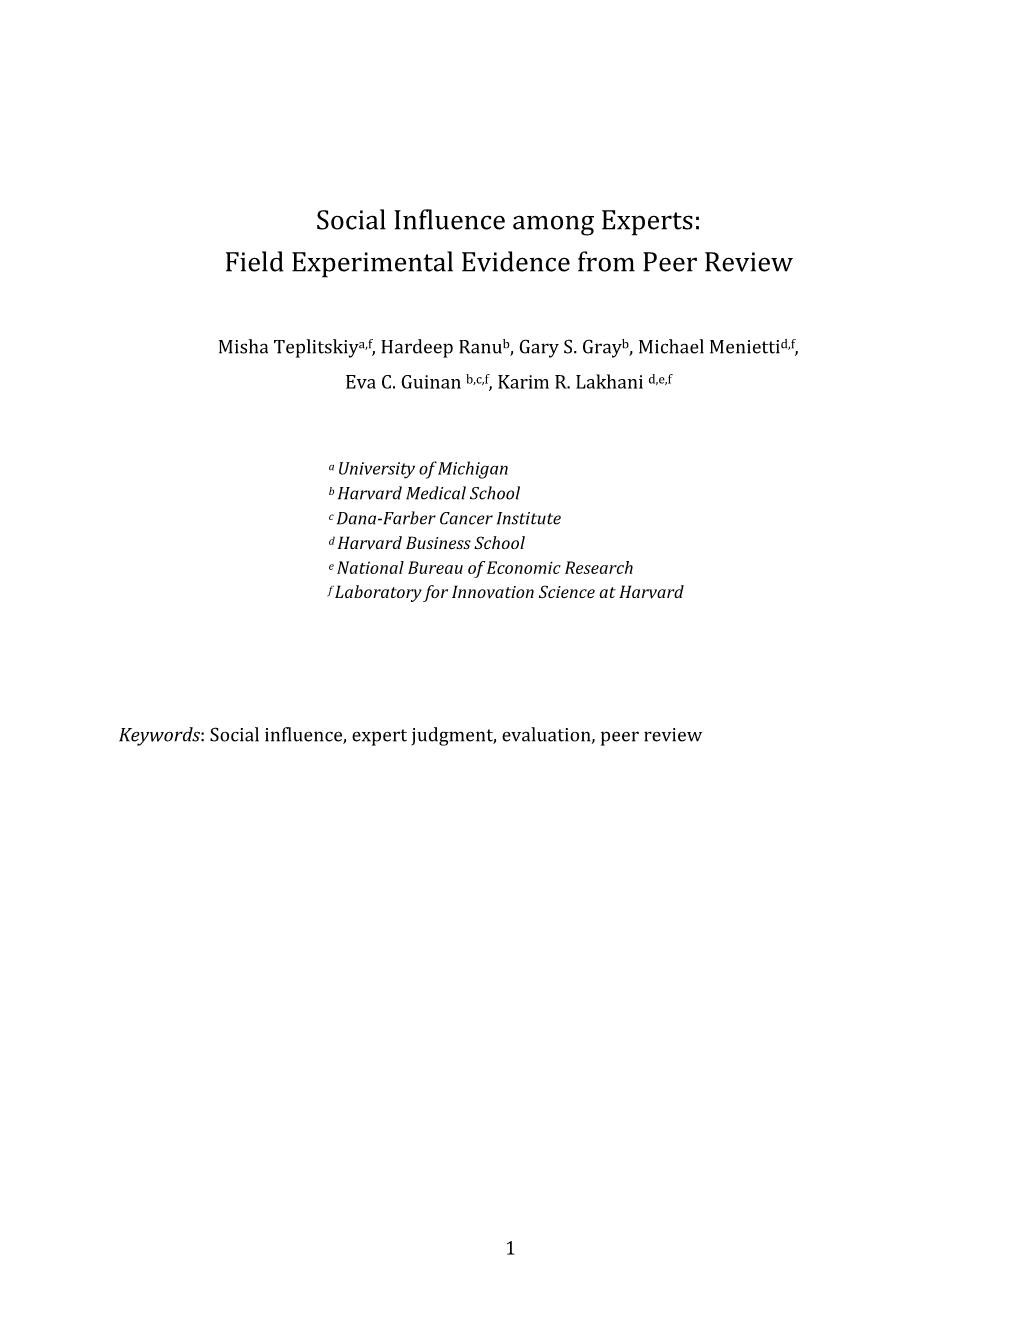 Social Influence Among Experts: Field Experimental Evidence from Peer Review